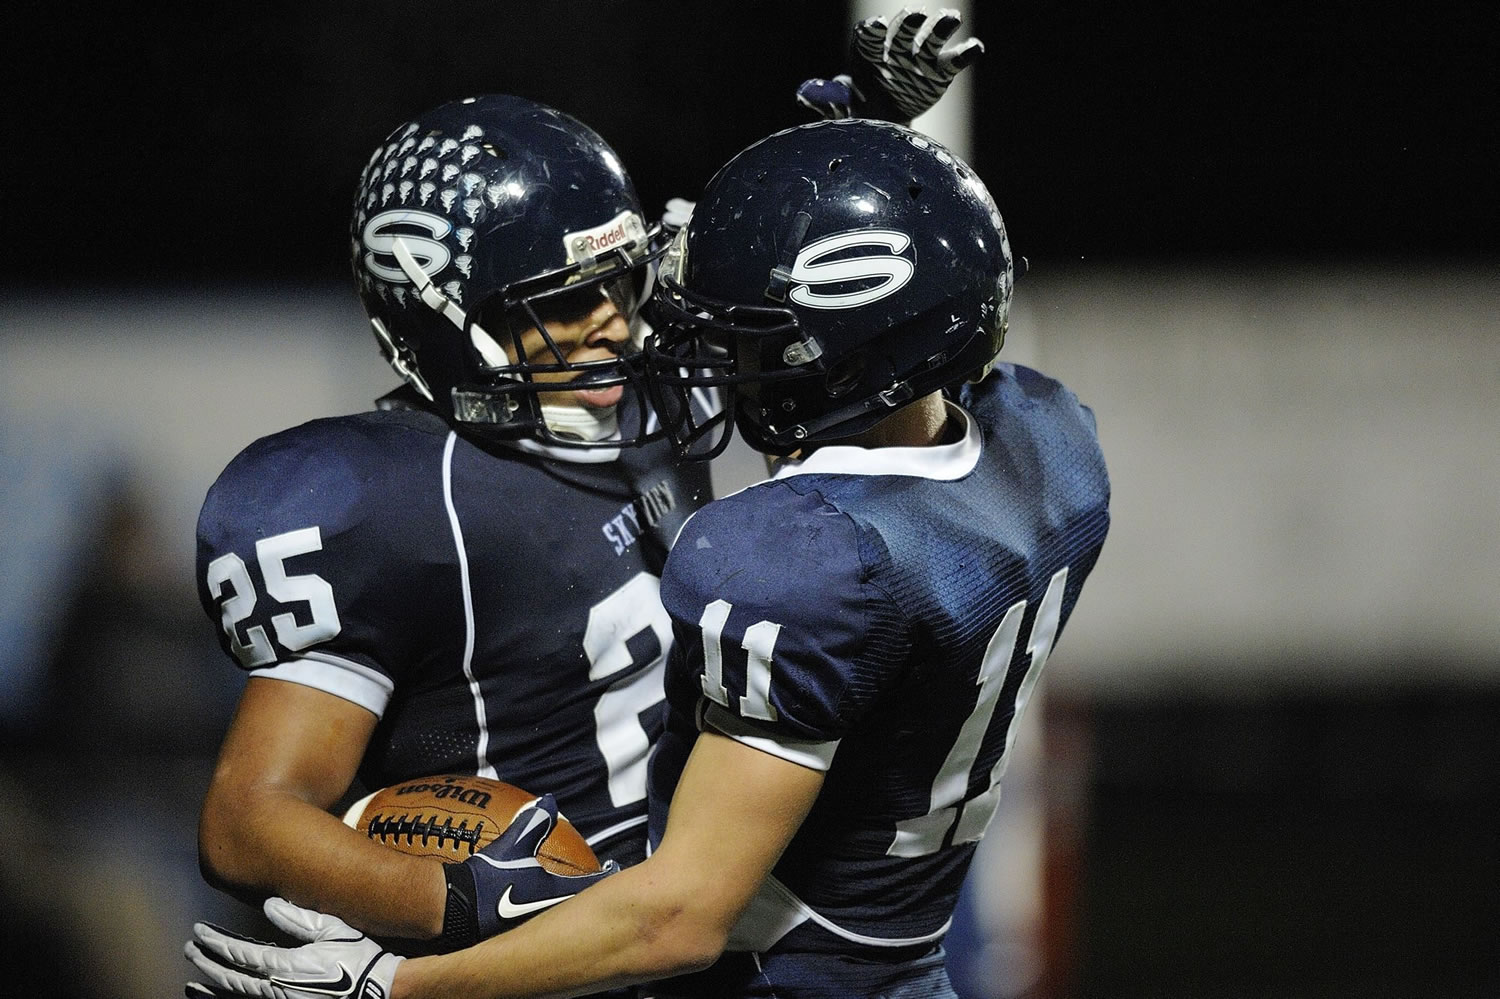 Safeties Mo Morrison (25) and David Garlington have combined for eight interceptions this year for Skyview.